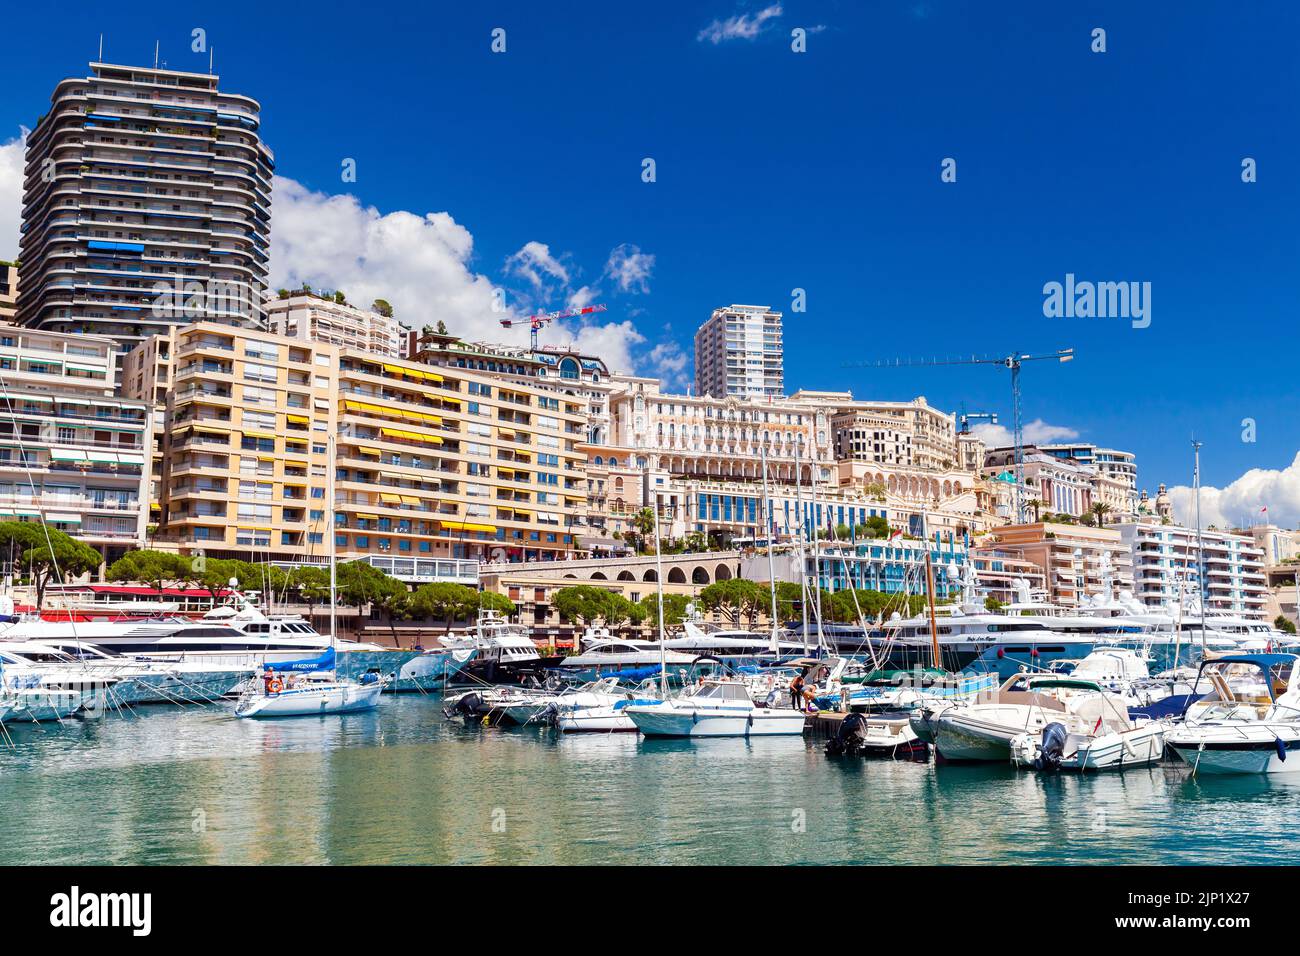 Monte Carlo, Monaco - August 15, 2018: Port Hercule photo taken on a sunny summer day. Yachts and pleasure boats are moored in marina Stock Photo